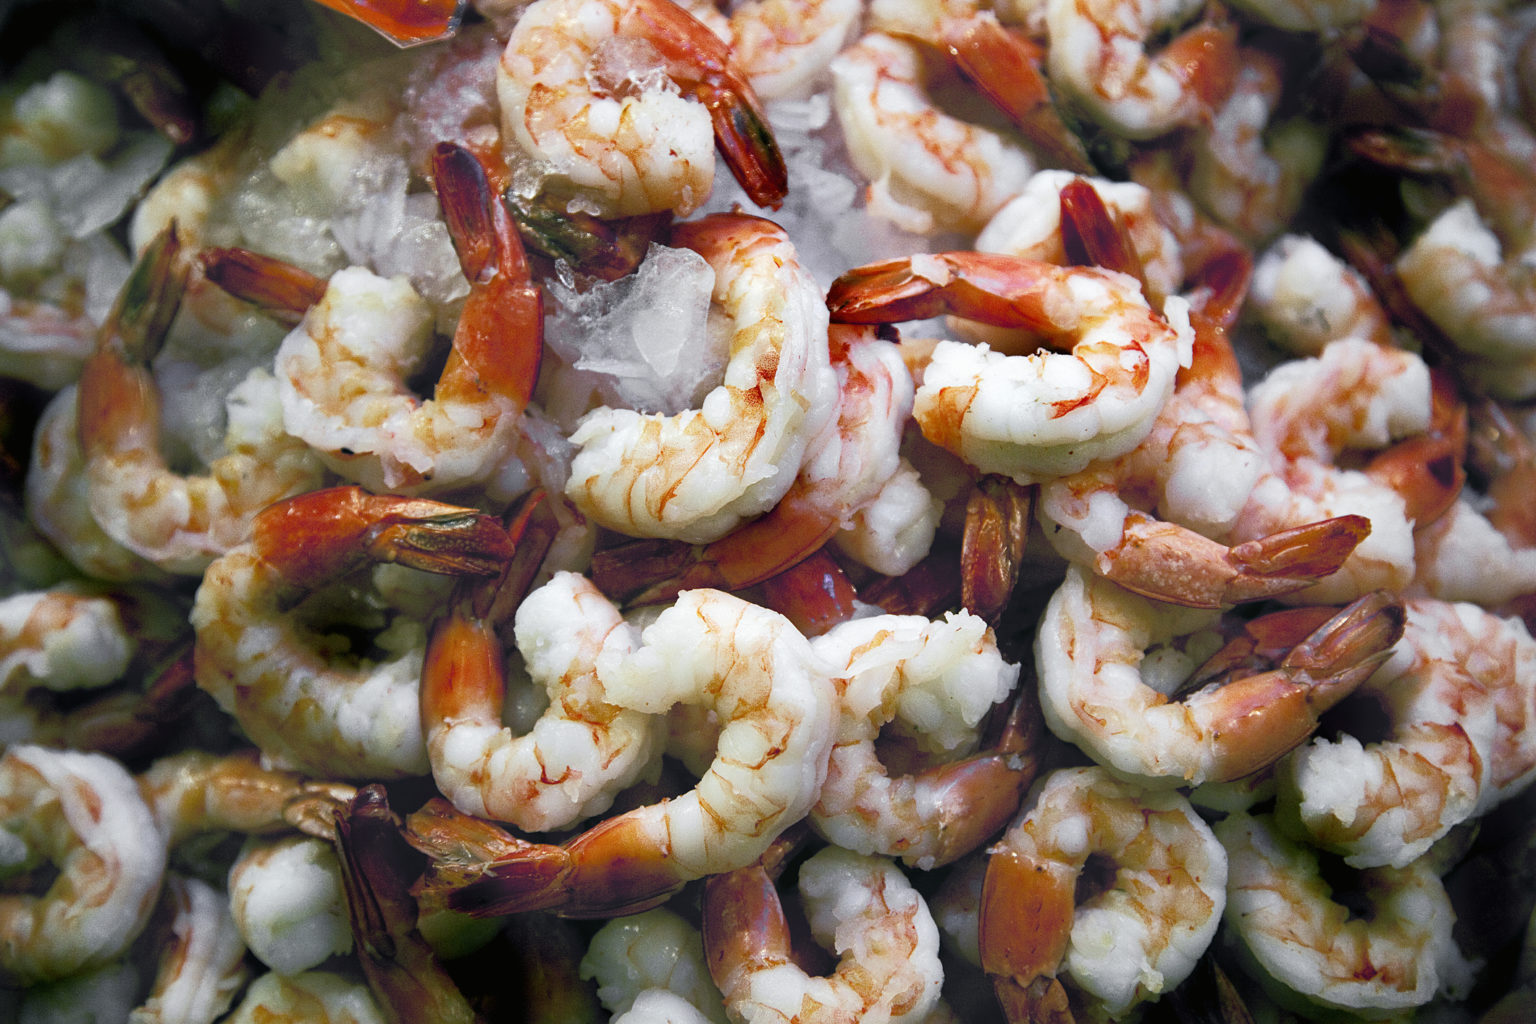 Huge Shrimp Recall from Target, Whole Foods, Meijer and More